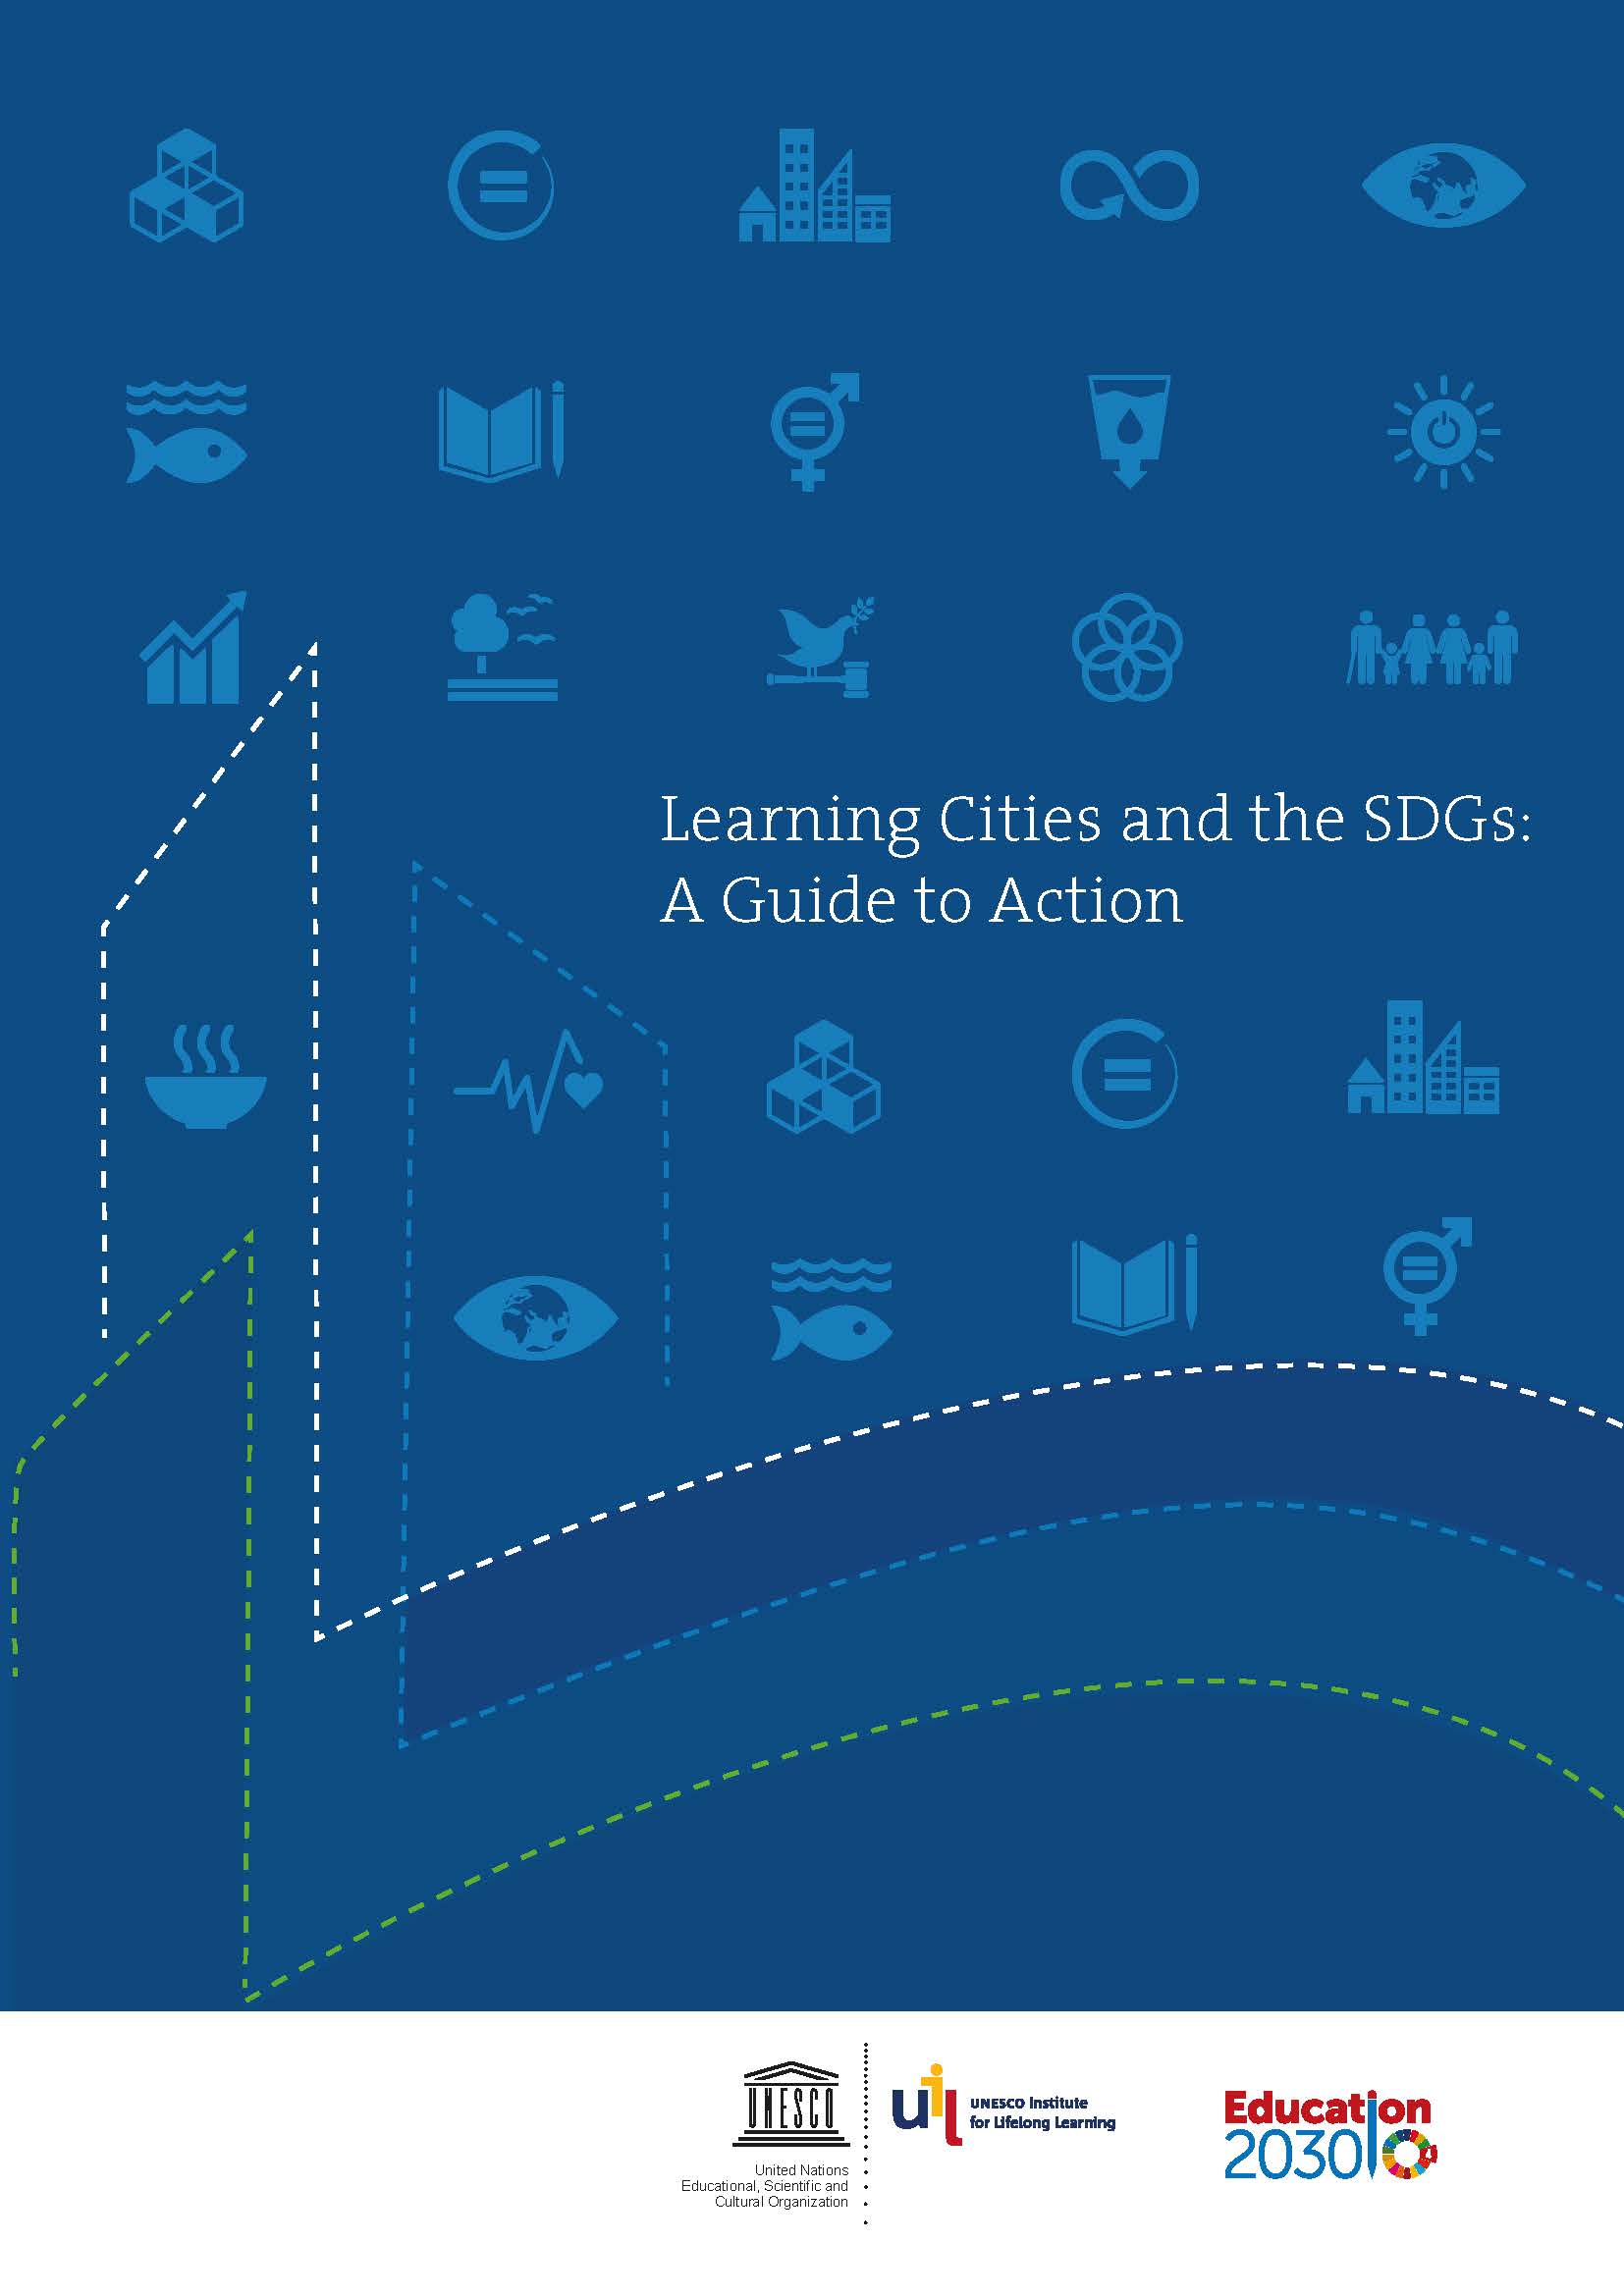 Learning Cities and the SDGs: A Guide to Action